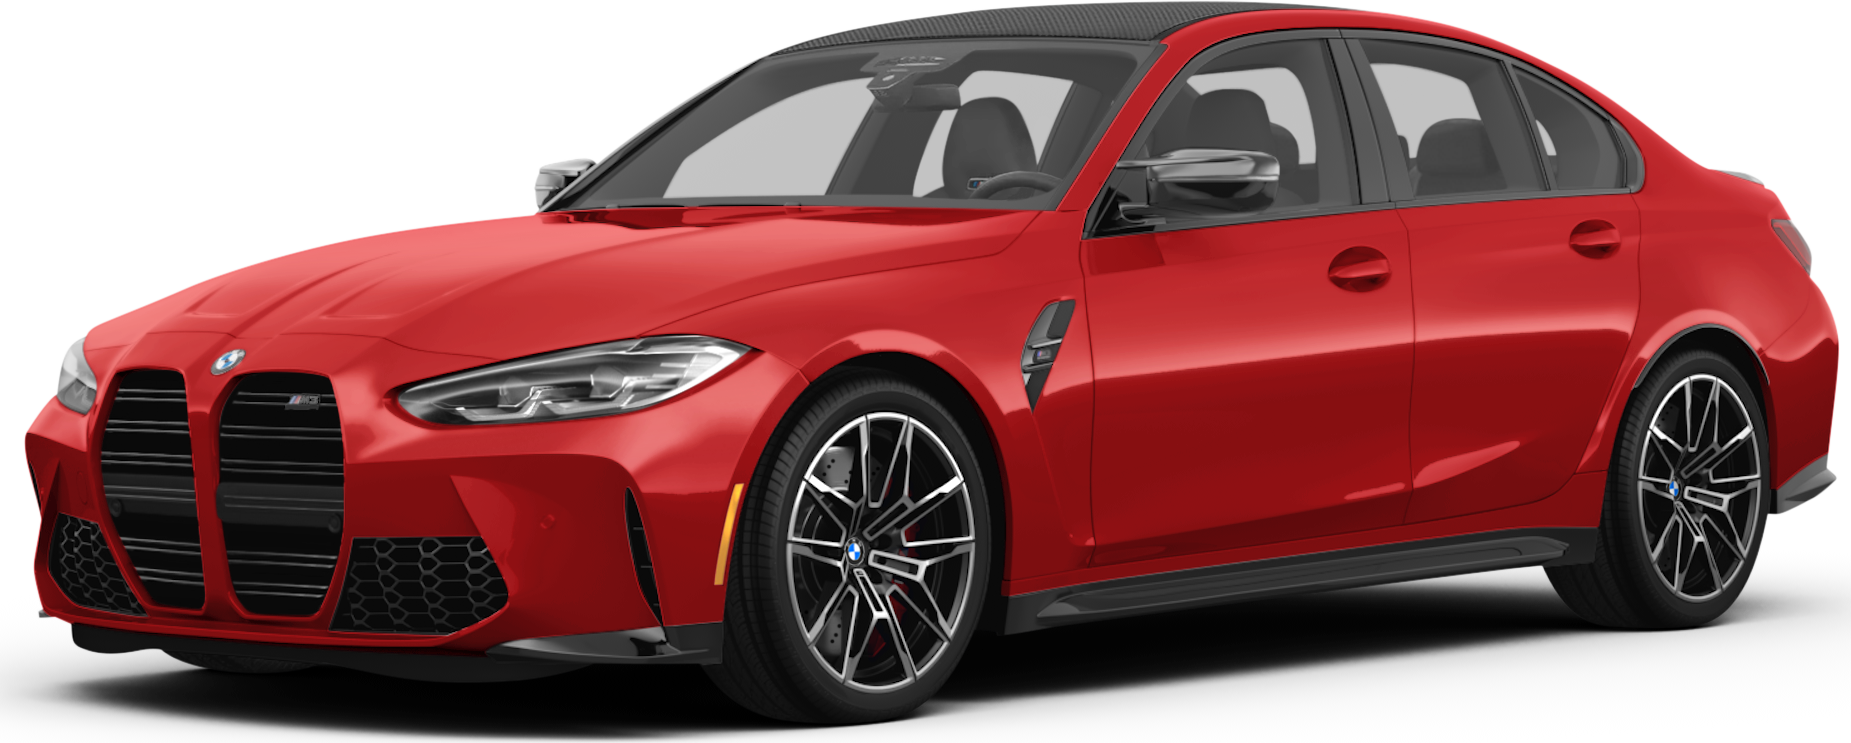 BMW M3 News and Reviews